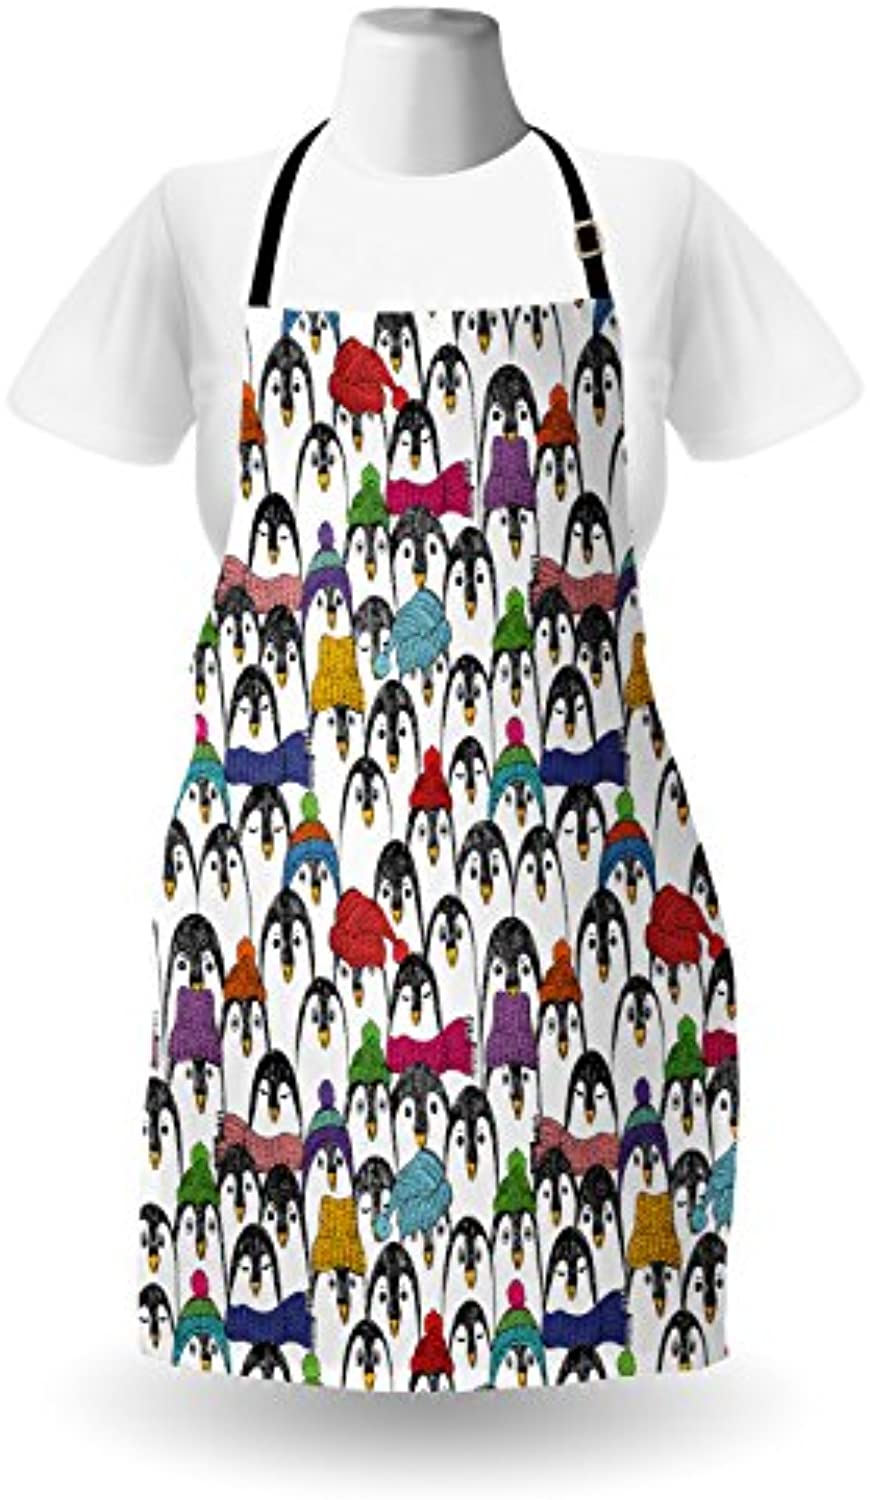 Granbey Sea Animals Apron  Pattern Penguins in Colorful Hats and Scarfs Cold Winter Fun Art  Unisex Kitchen Bib with Adjustable Neck for Cooking Gardening  Adult Size  Black Yellow